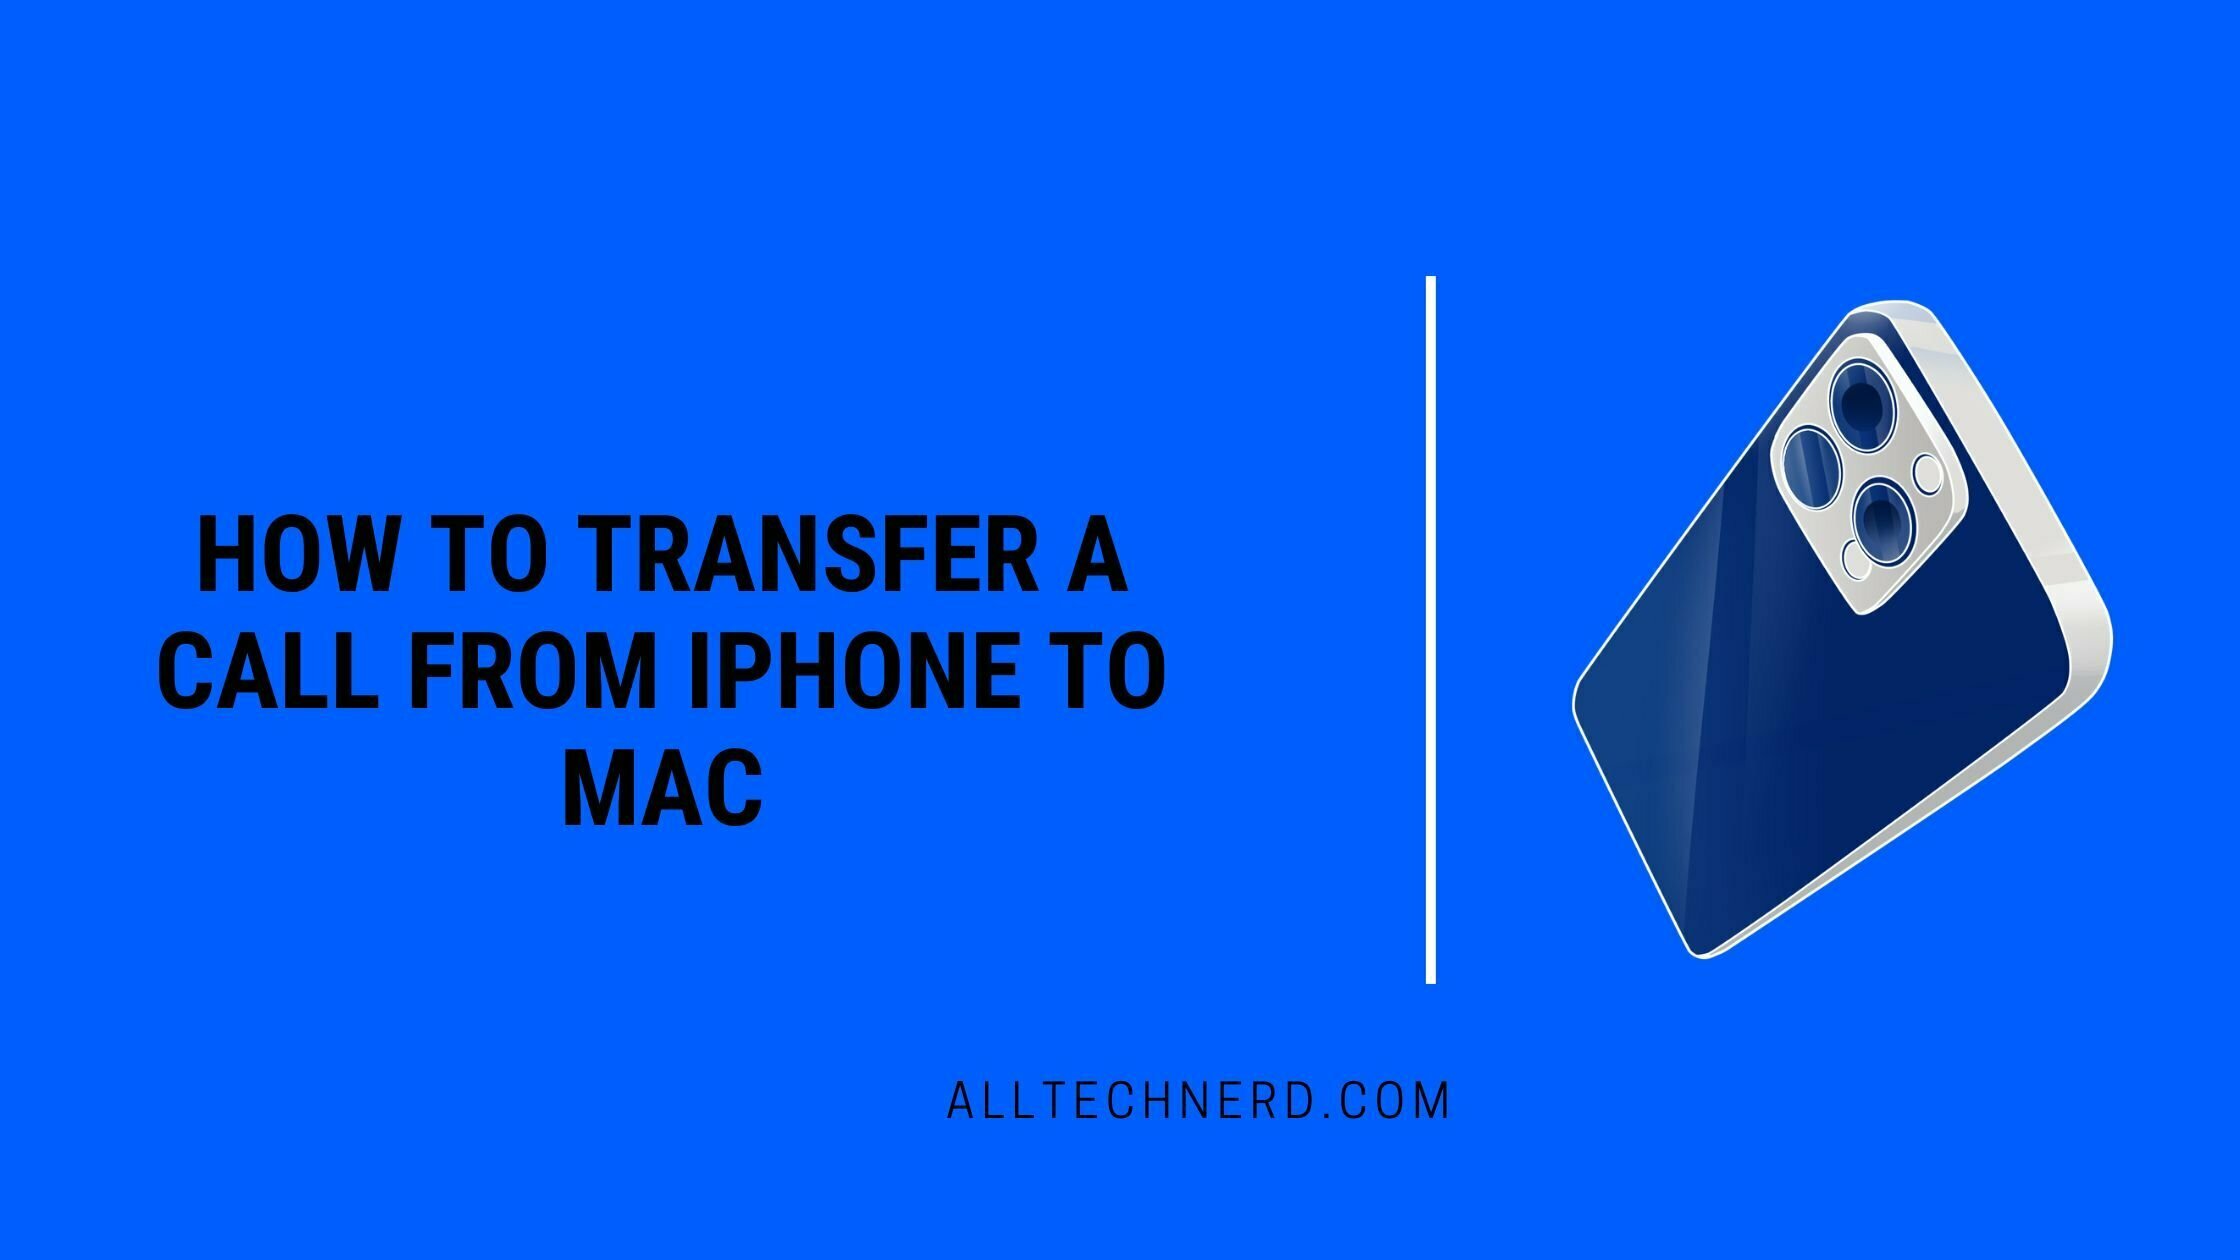 How to Transfer a Call from iPhone to Mac